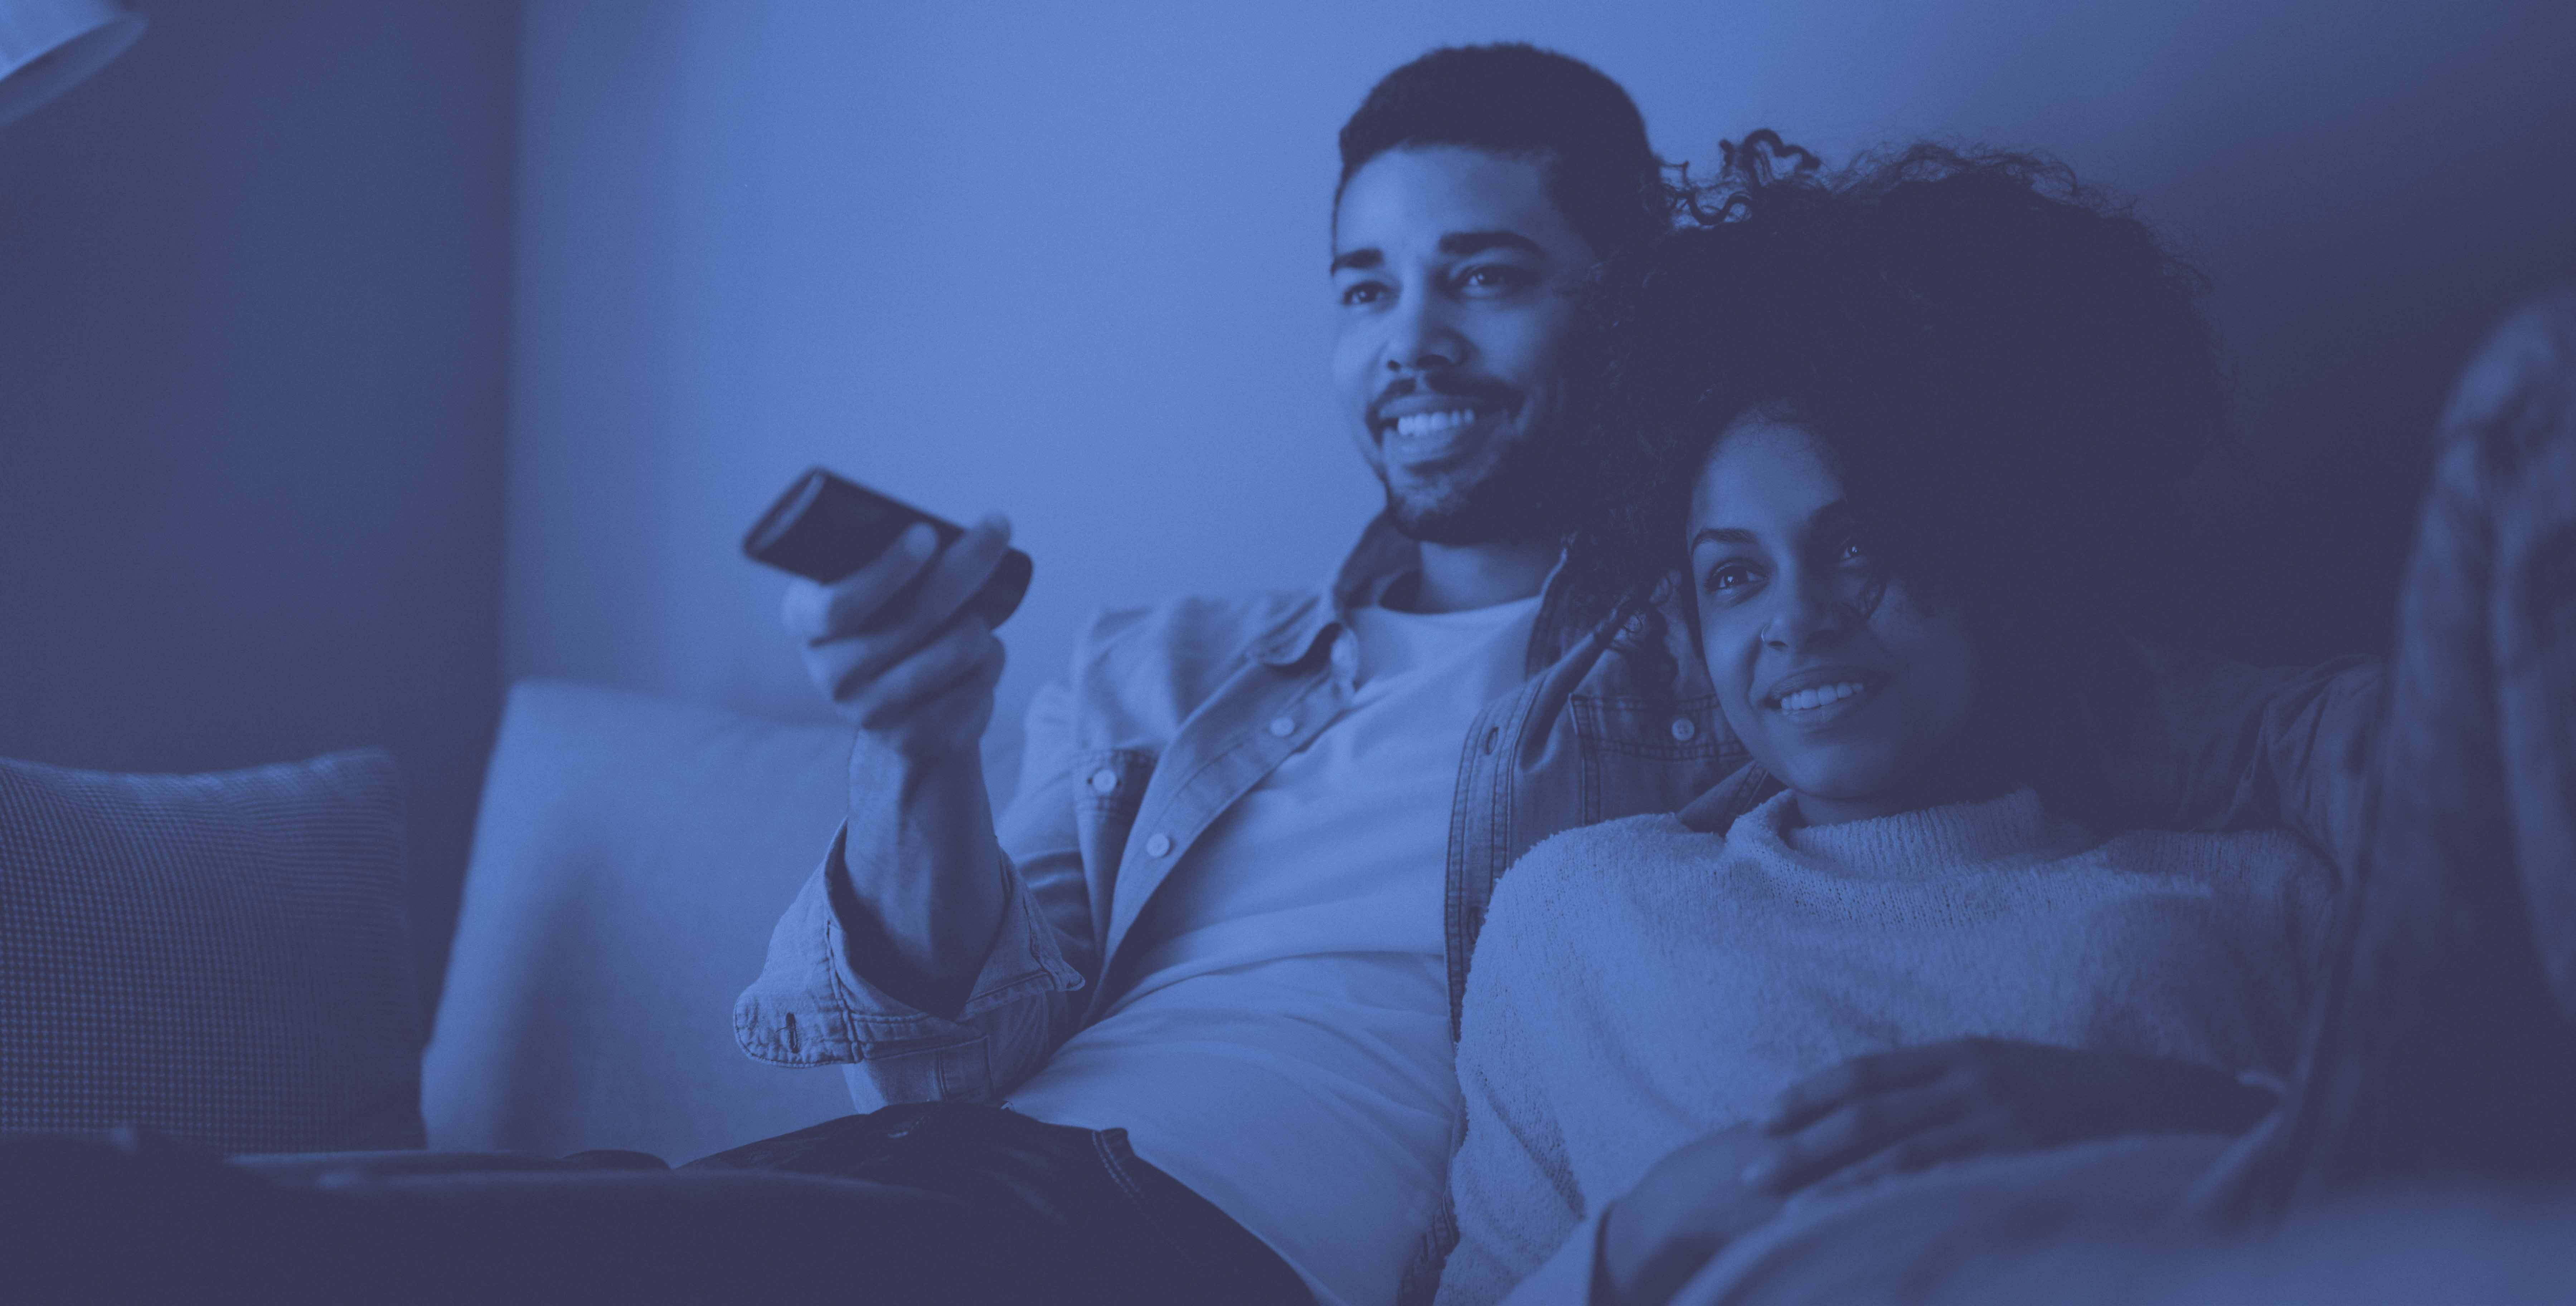 man and woman sitting on couch with remote watching TV